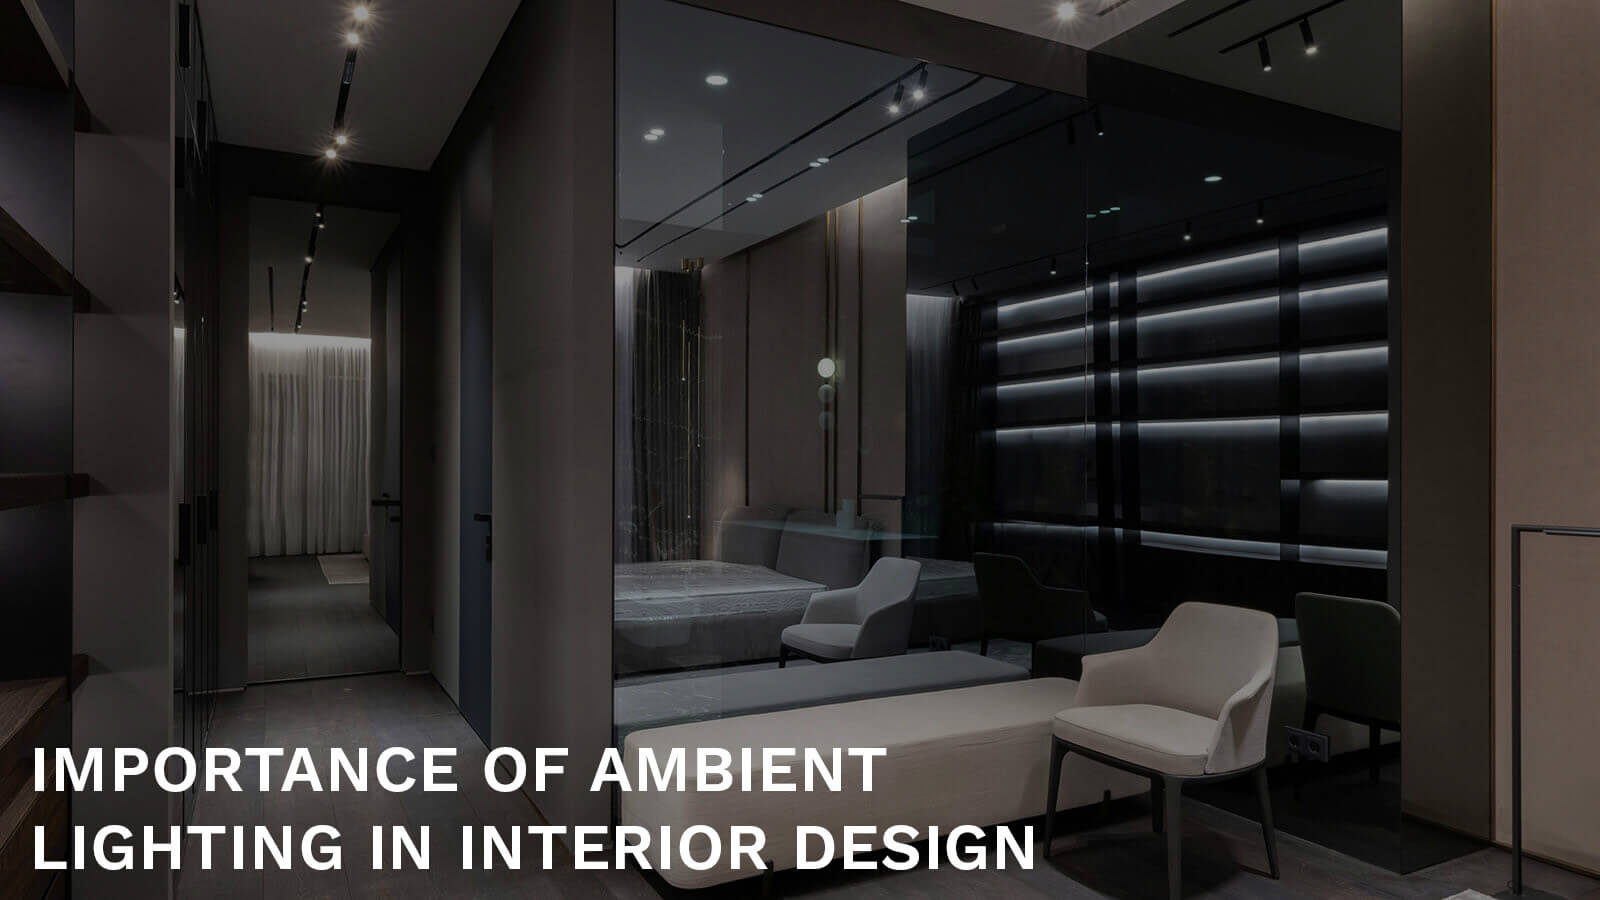 Importance of ambient lighting in interior design